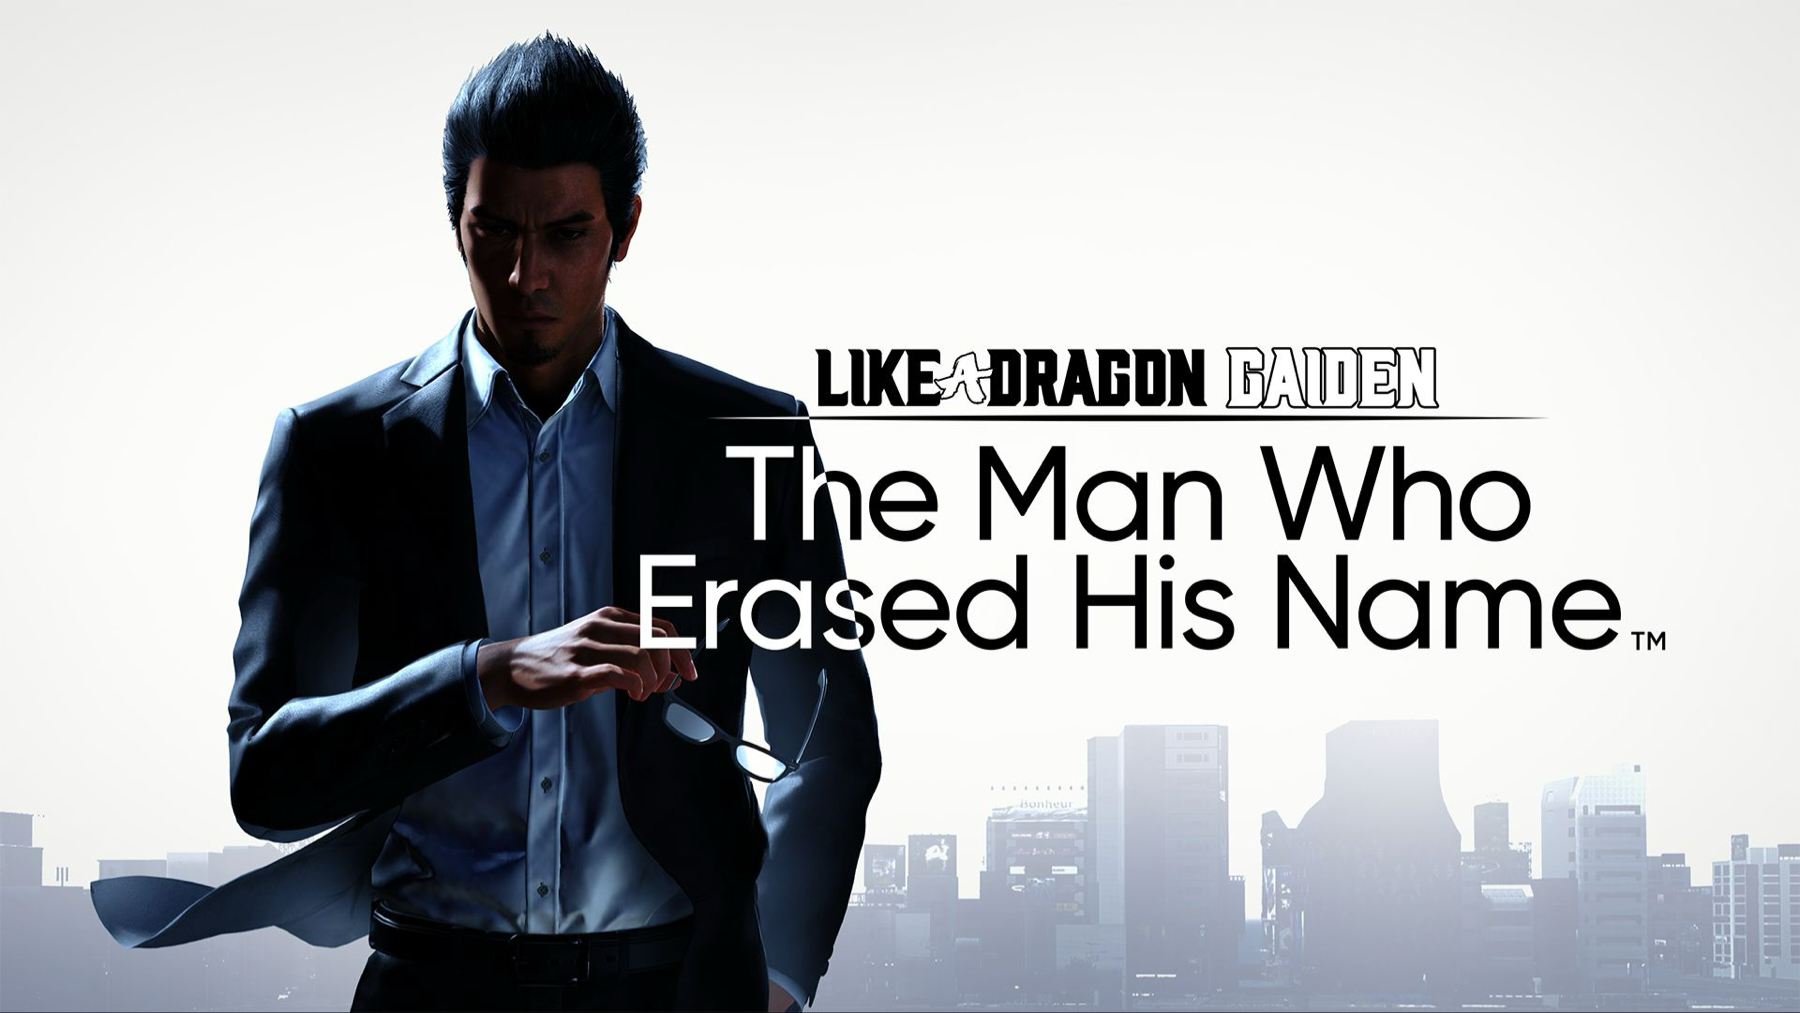 A promotional graphic for video game titled &ldquo;Like a Dragon Gaiden: The Man Who Erased His Name,&rdquo; featuring a stylized male character in a suit and a cityscape silhouette in the background.